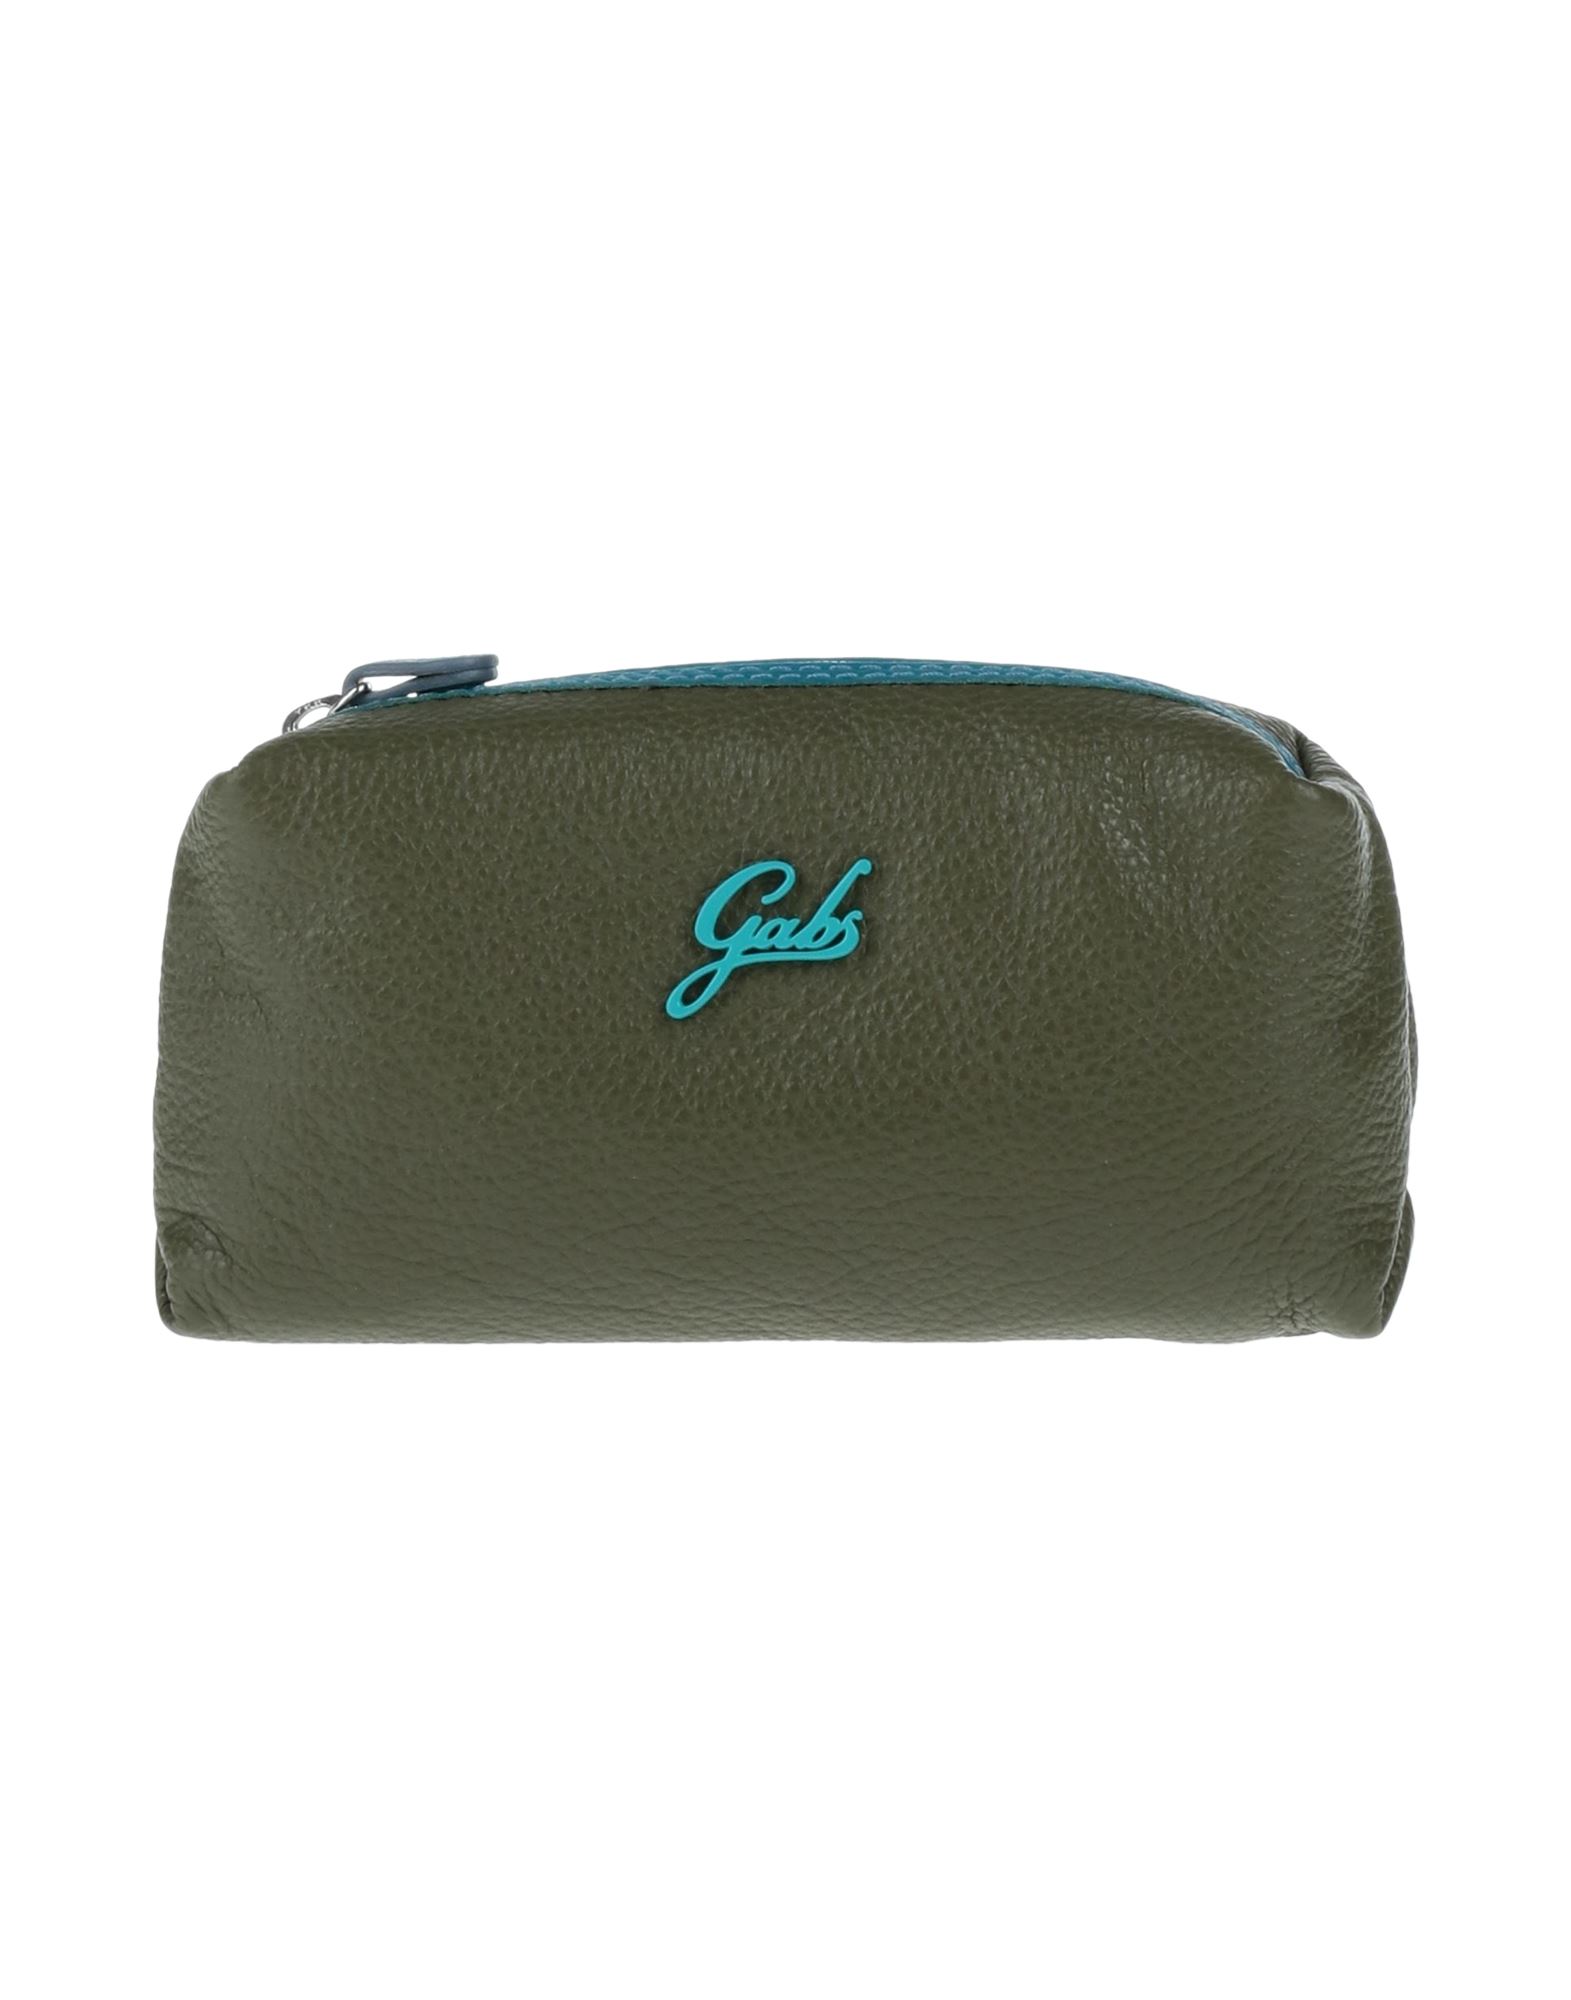 Gabs Beauty Cases In Military Green